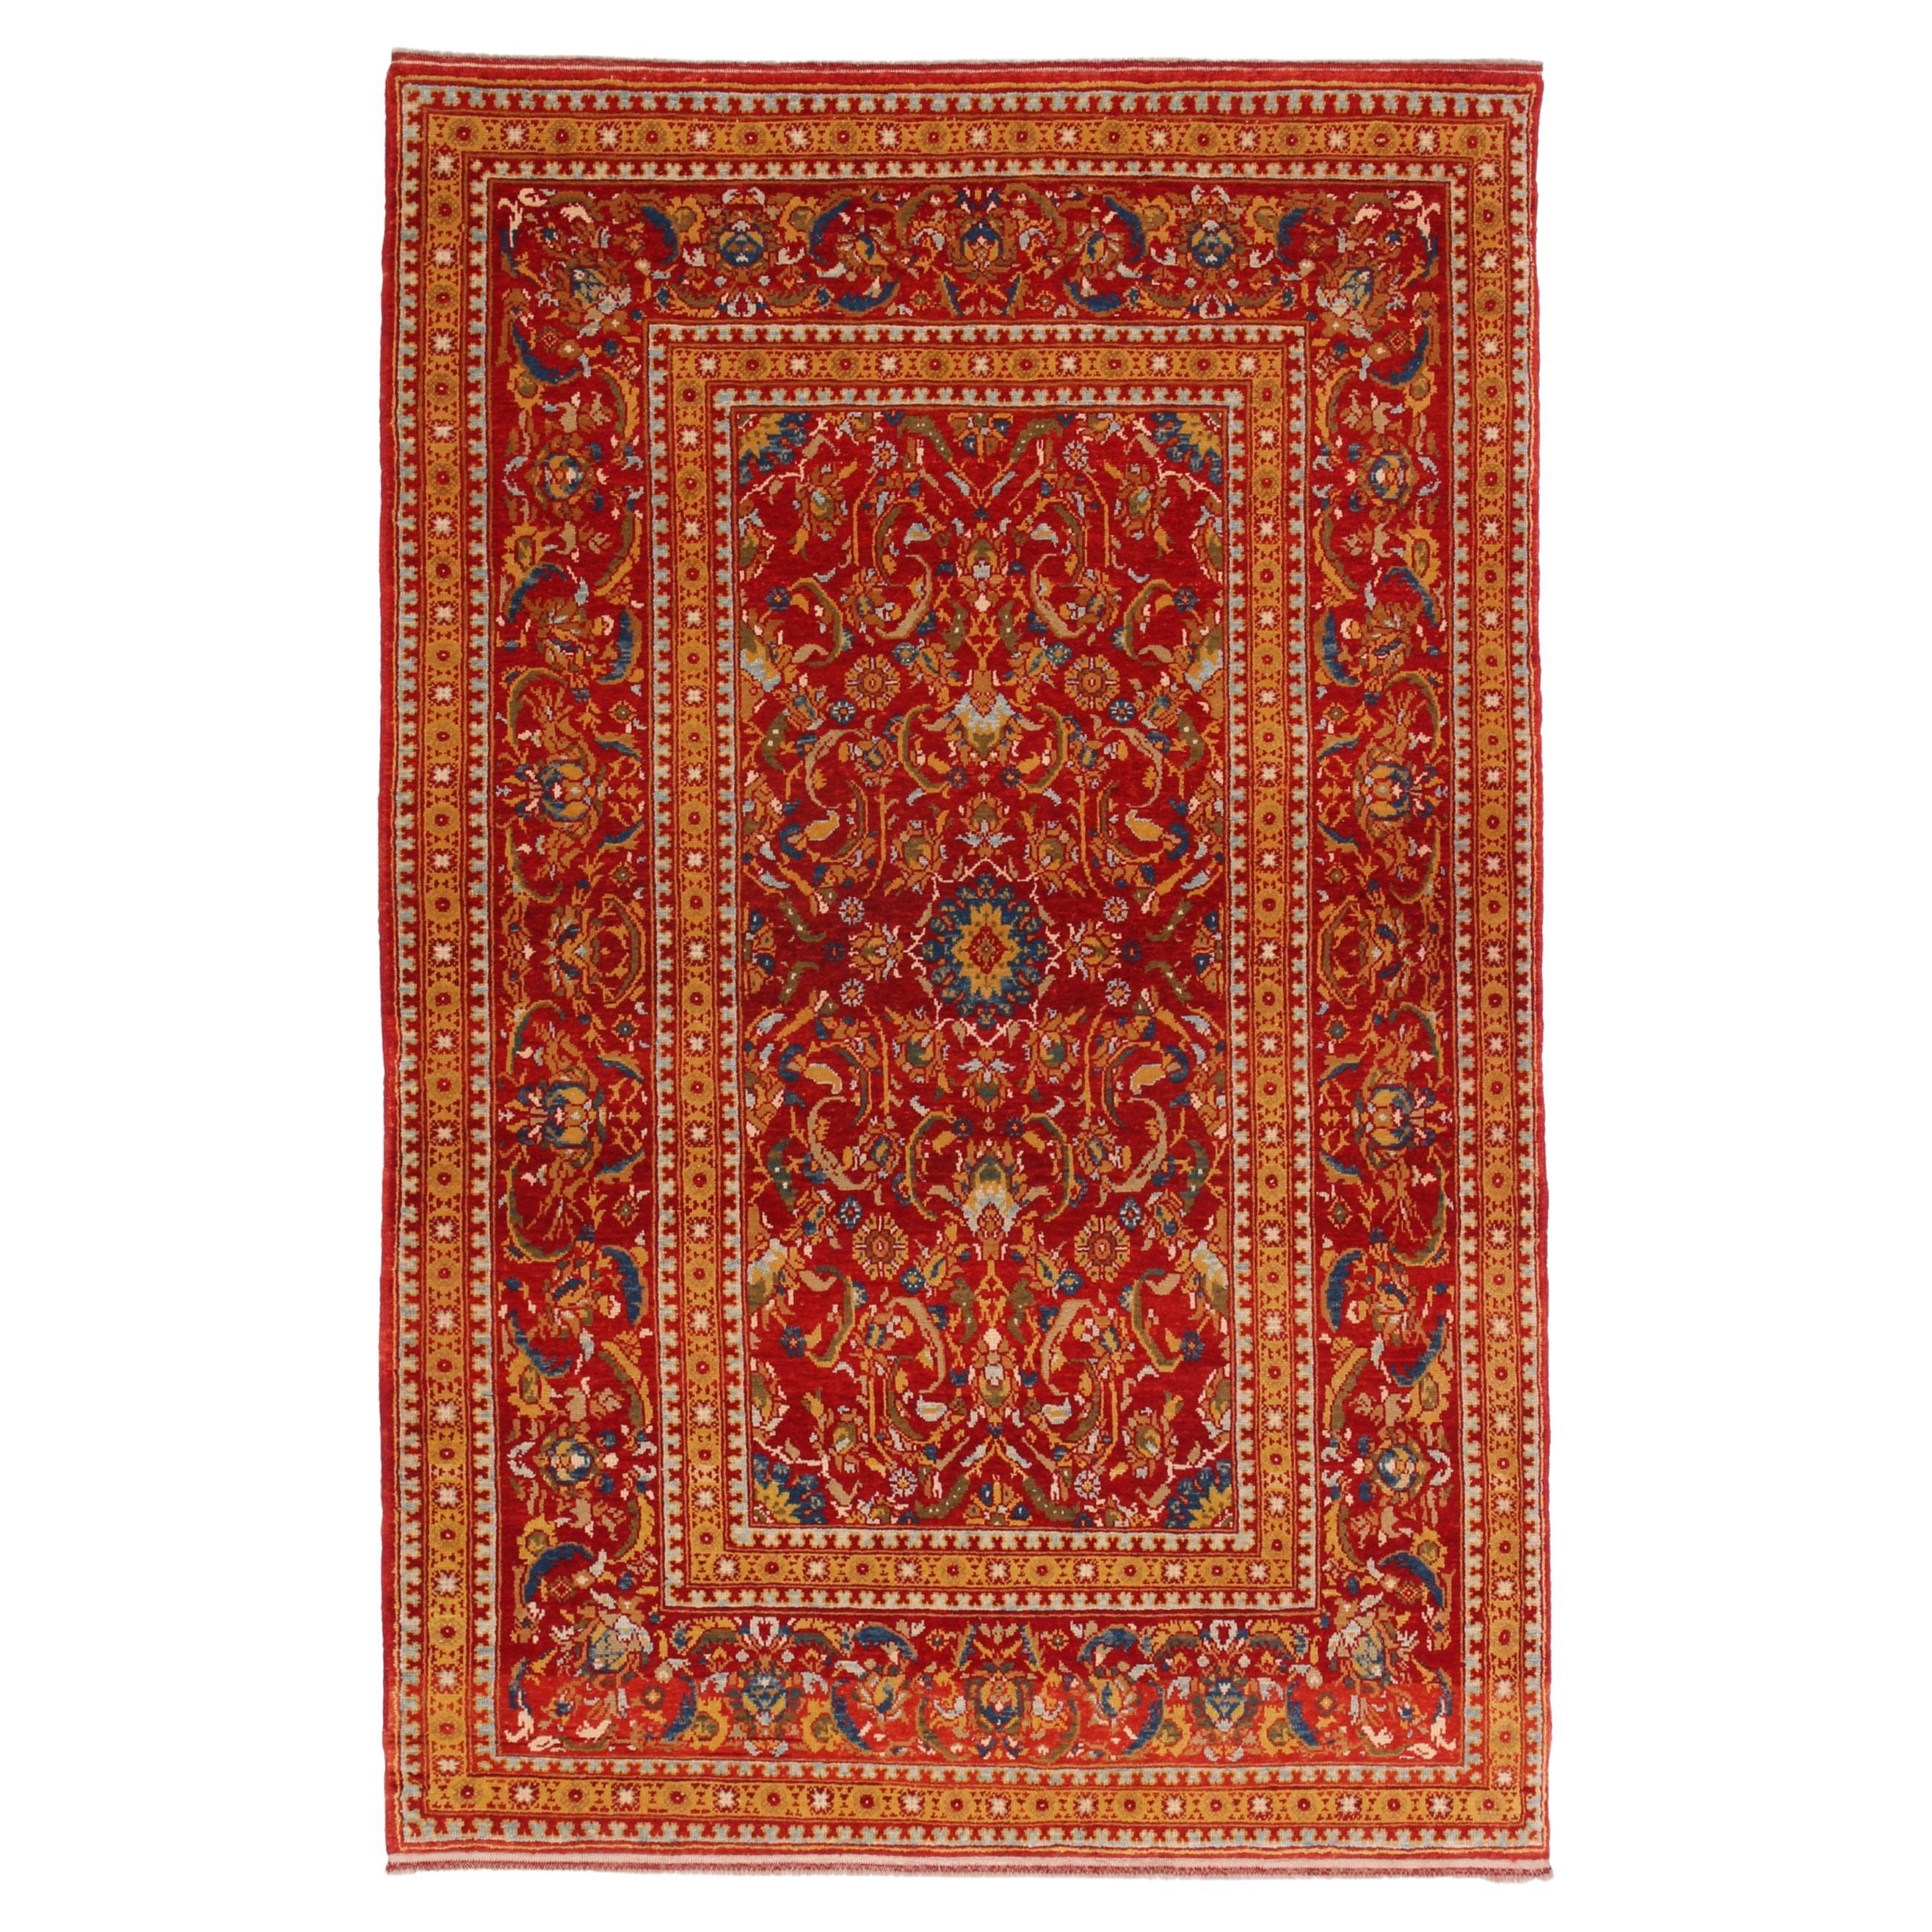 Ararat Rugs Turkish Court Manufactury Rug Ottoman Revival Rug Natural Dyed For Sale